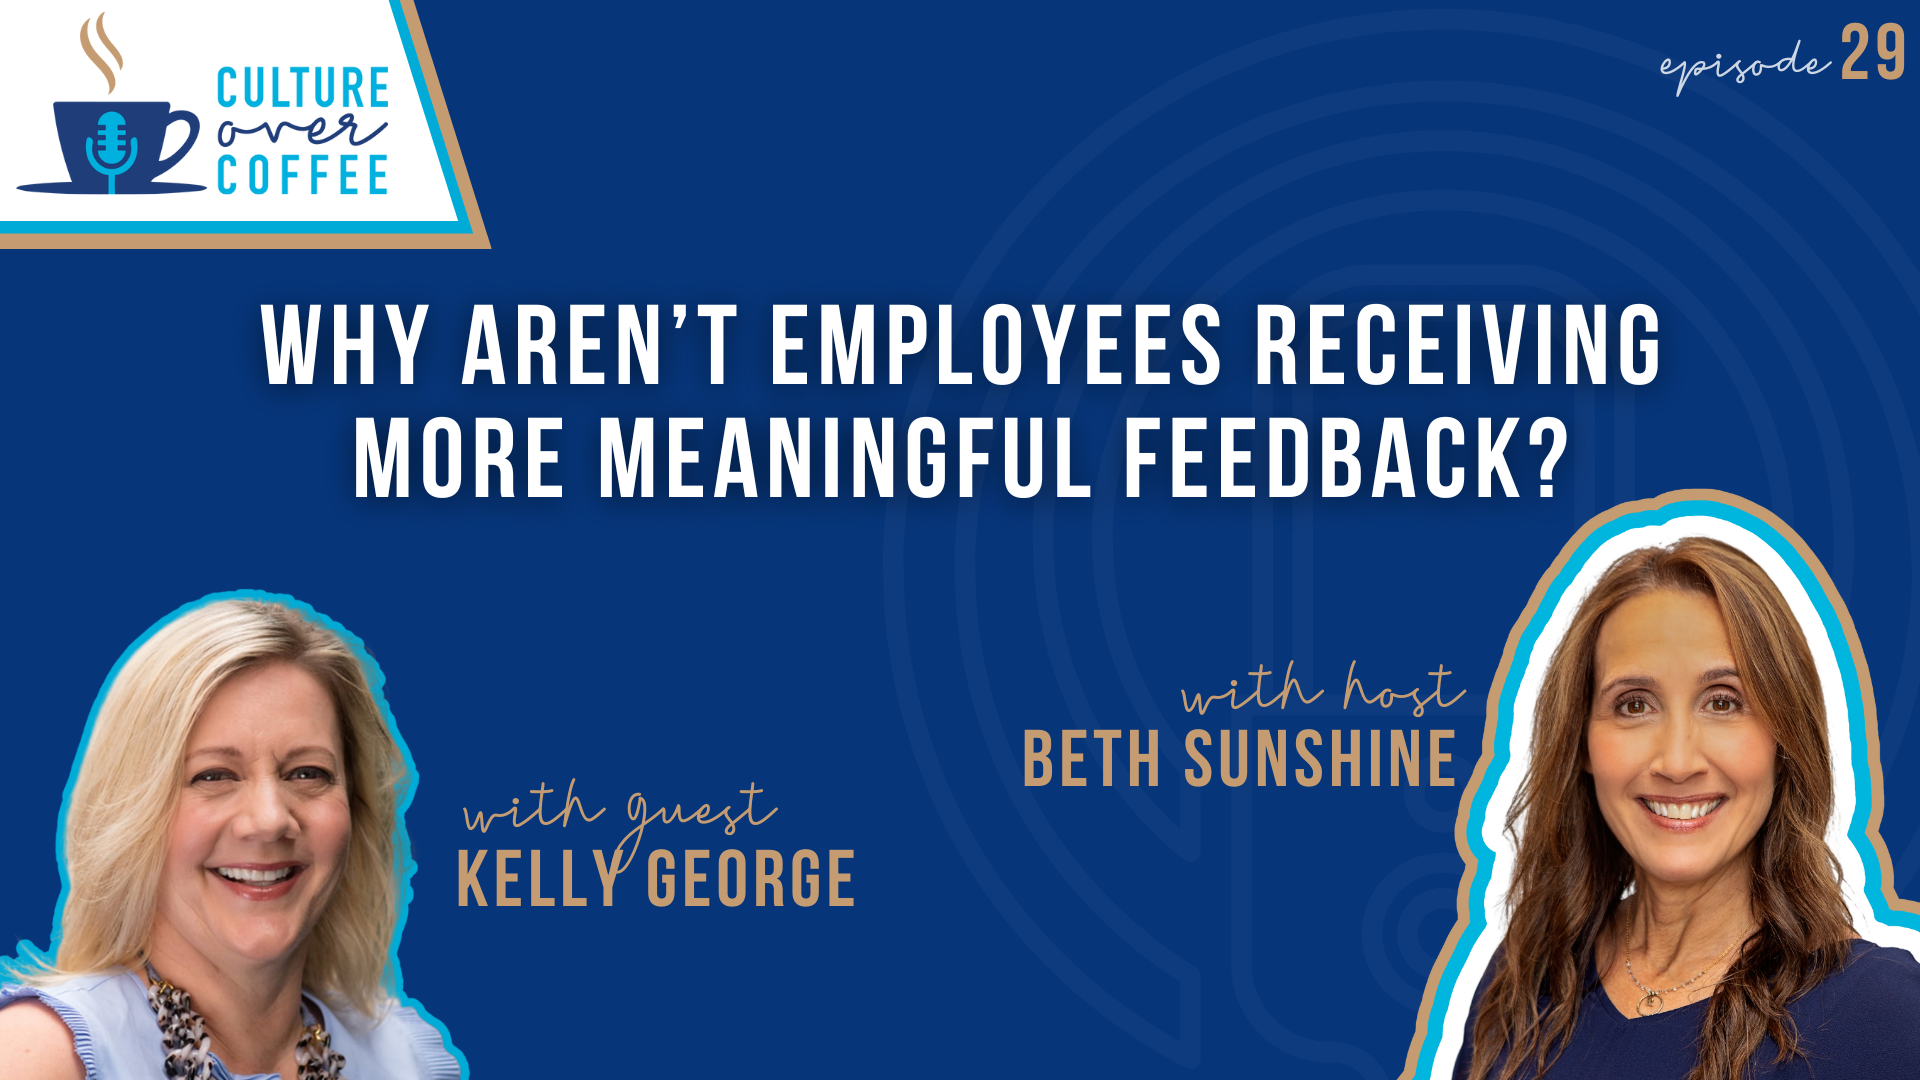 Why Aren’t Employees Receiving More Meaningful Feedback? With Kelly George